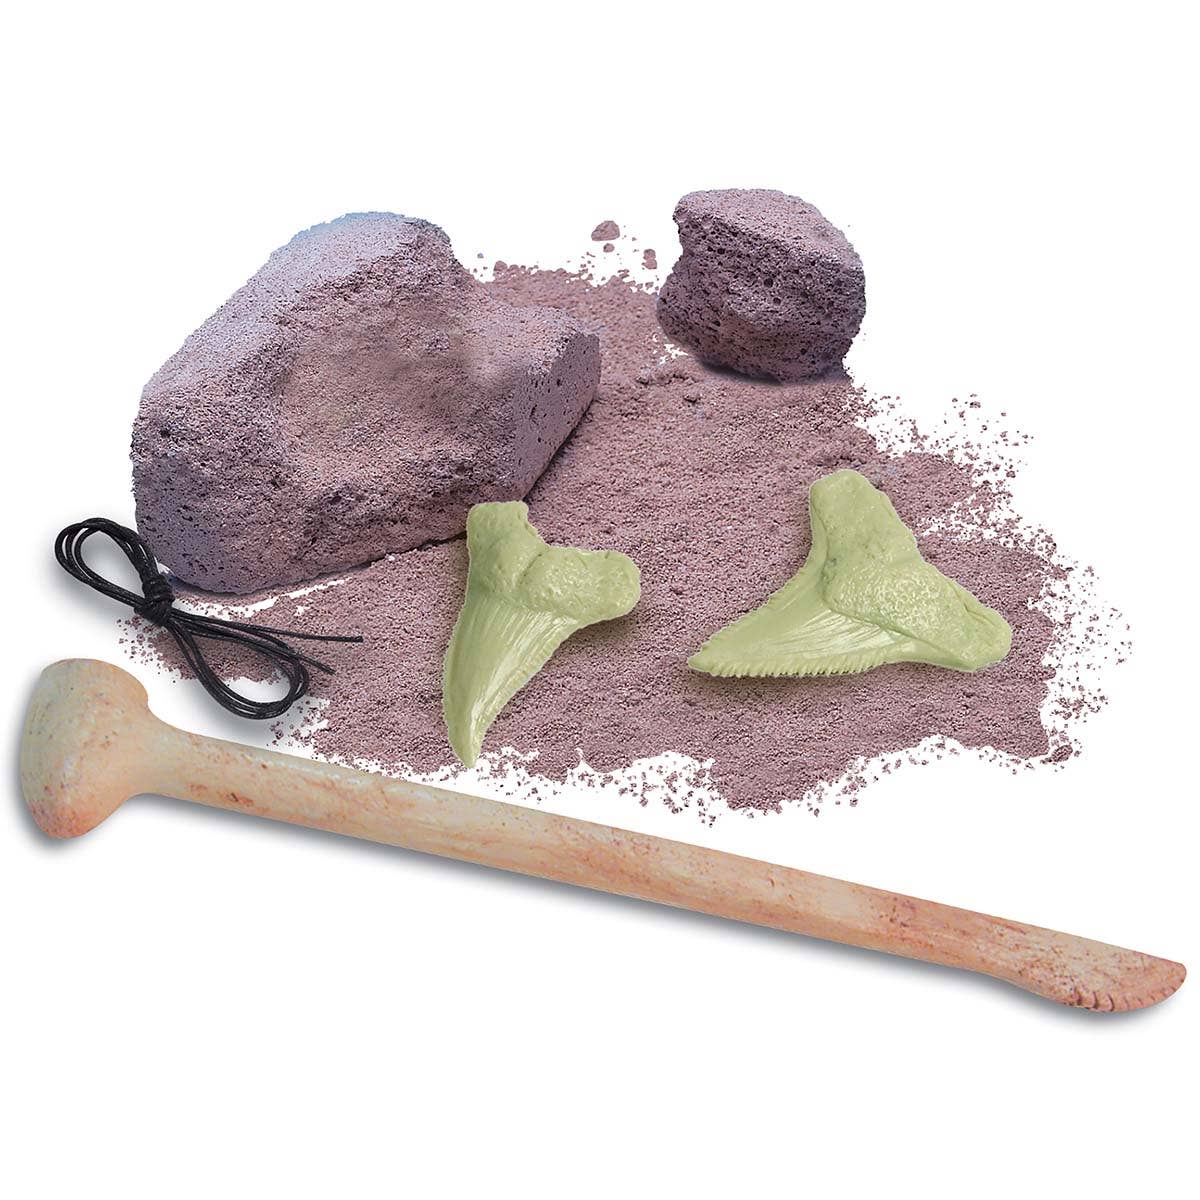 4M Dig and Excavate Glow Shark Tooth Fossils Toy